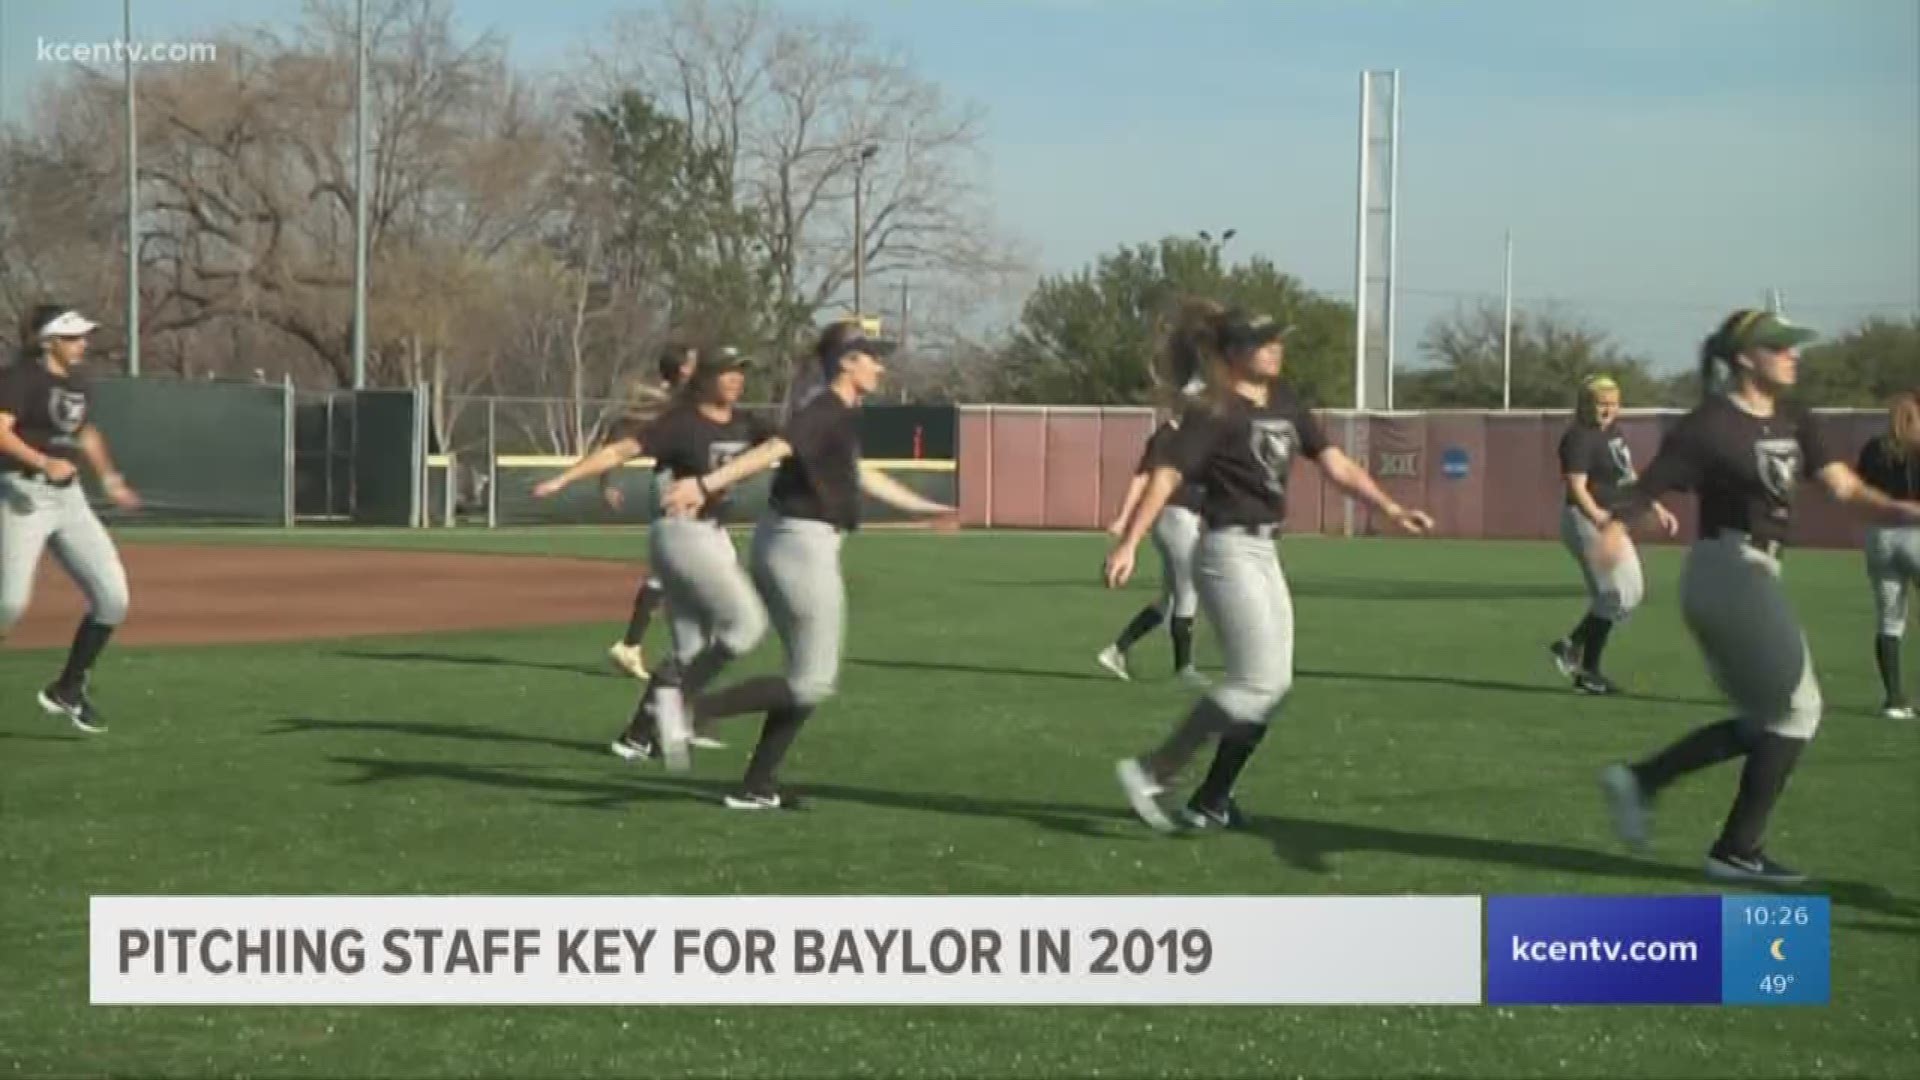 Pitching Staff Key for Baylor in 2019